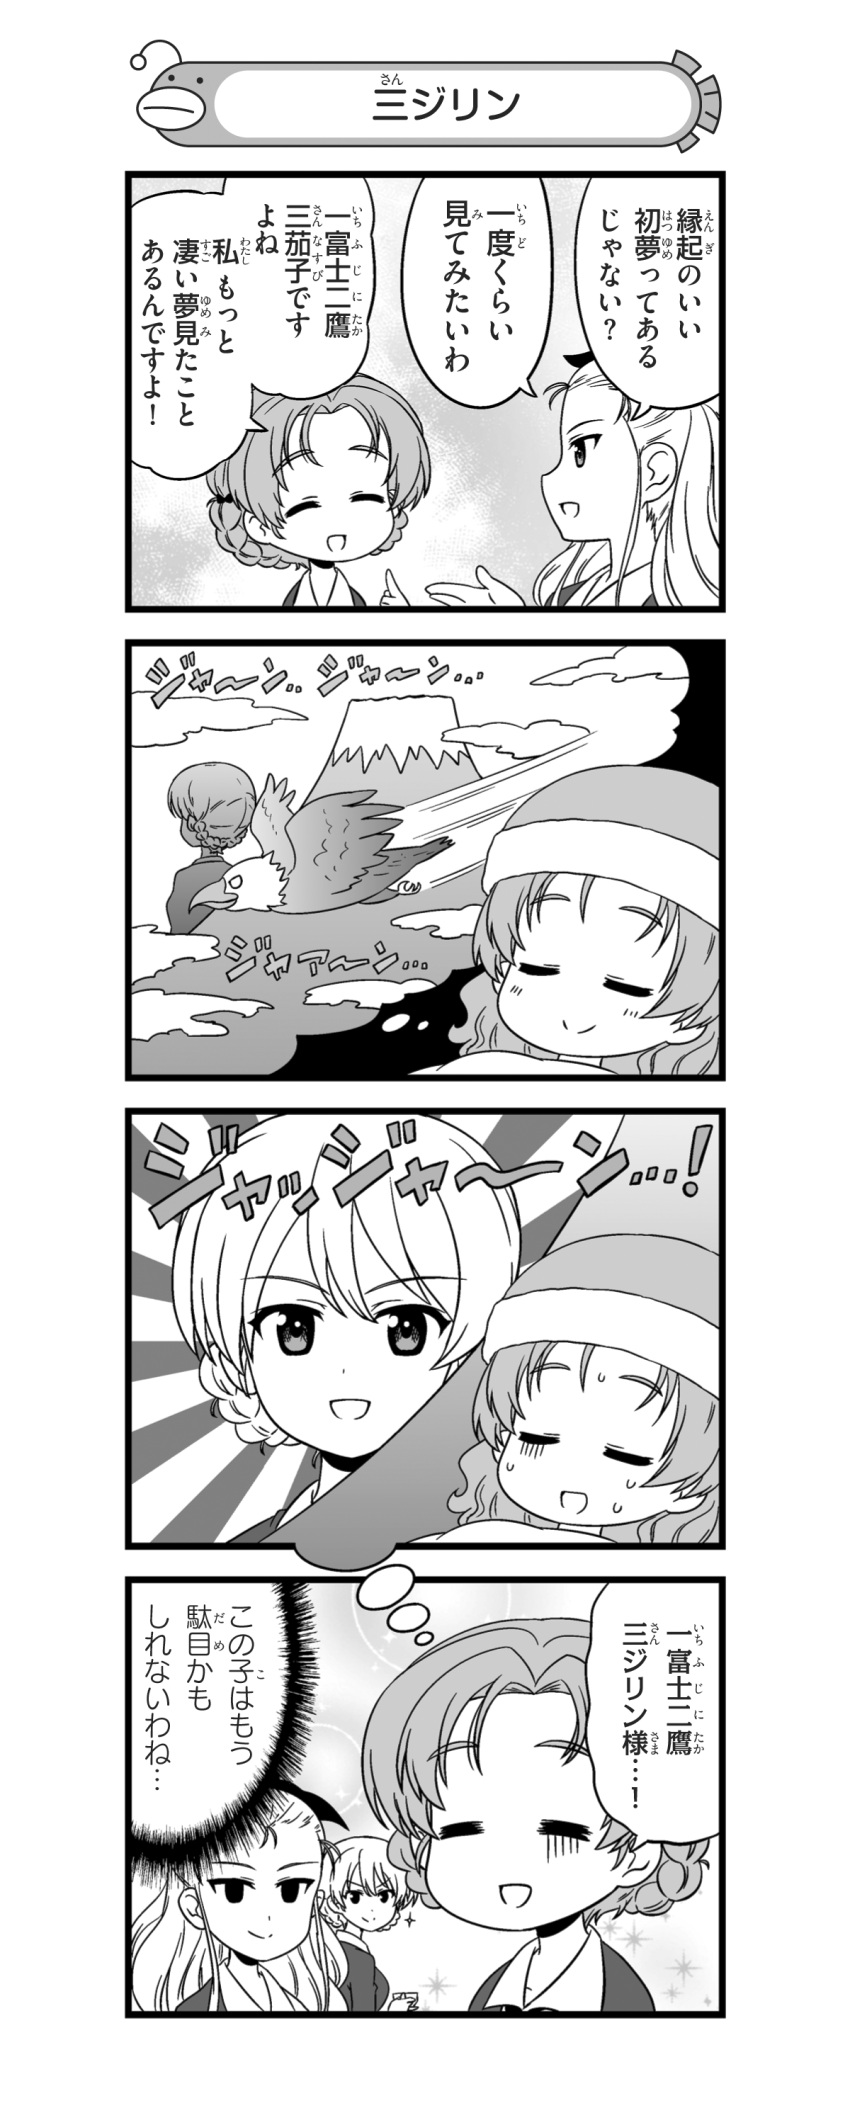 3girls 4koma :d absurdres alternate_hairstyle assam bangs bird bow braid closed_eyes closed_mouth clouds comic cup darjeeling dreaming dress_shirt eagle empty_eyes eyebrows_visible_through_hair gesture girls_und_panzer gloom_(expression) greyscale hair_bow hair_down hair_pulled_back hair_ribbon hat hatsuyume highres holding holding_cup holding_saucer light_blush long_hair long_sleeves monochrome mount_fuji multiple_girls nanashiro_gorou necktie nightcap official_art open_mouth orange_pekoe parted_bangs pdf_available ribbon rising_sun school_uniform shirt short_hair sleeping smile st._gloriana's_school_uniform sunburst sweatdrop sweater teacup thought_bubble tied_hair twin_braids wing_collar